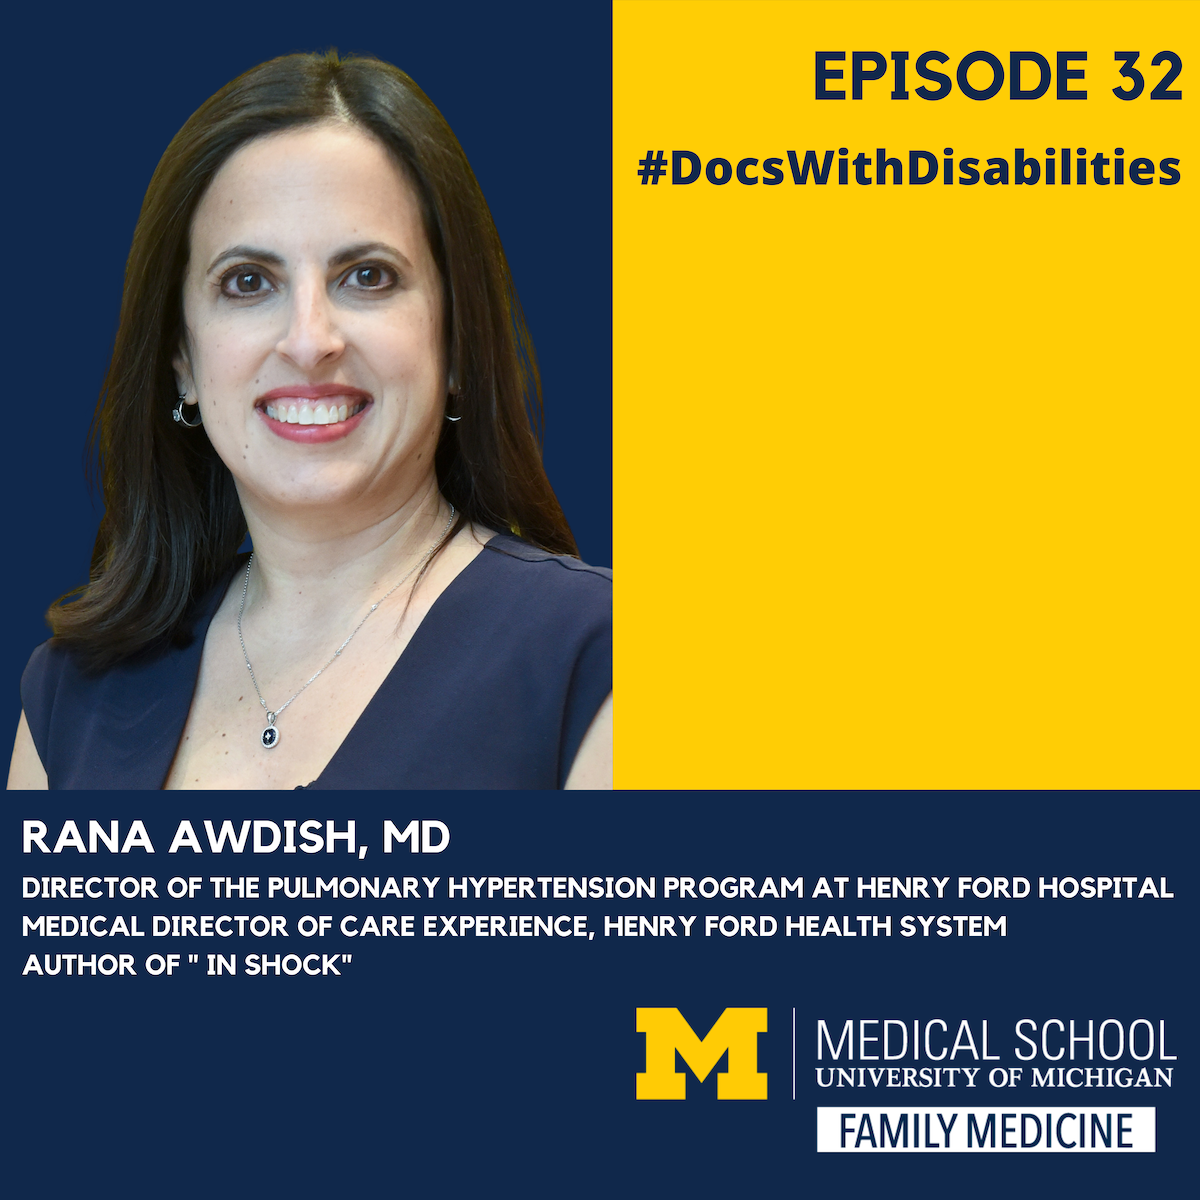 Docs With Disabilities podcast episode 32, Rana Awdish, MD Director of the Pulmonary Hypertension Program at Henry Ford Hospital. Medical director of care experience, Henry Ford Health System. Author of "In Shock" University of Michigan Medical School Dep